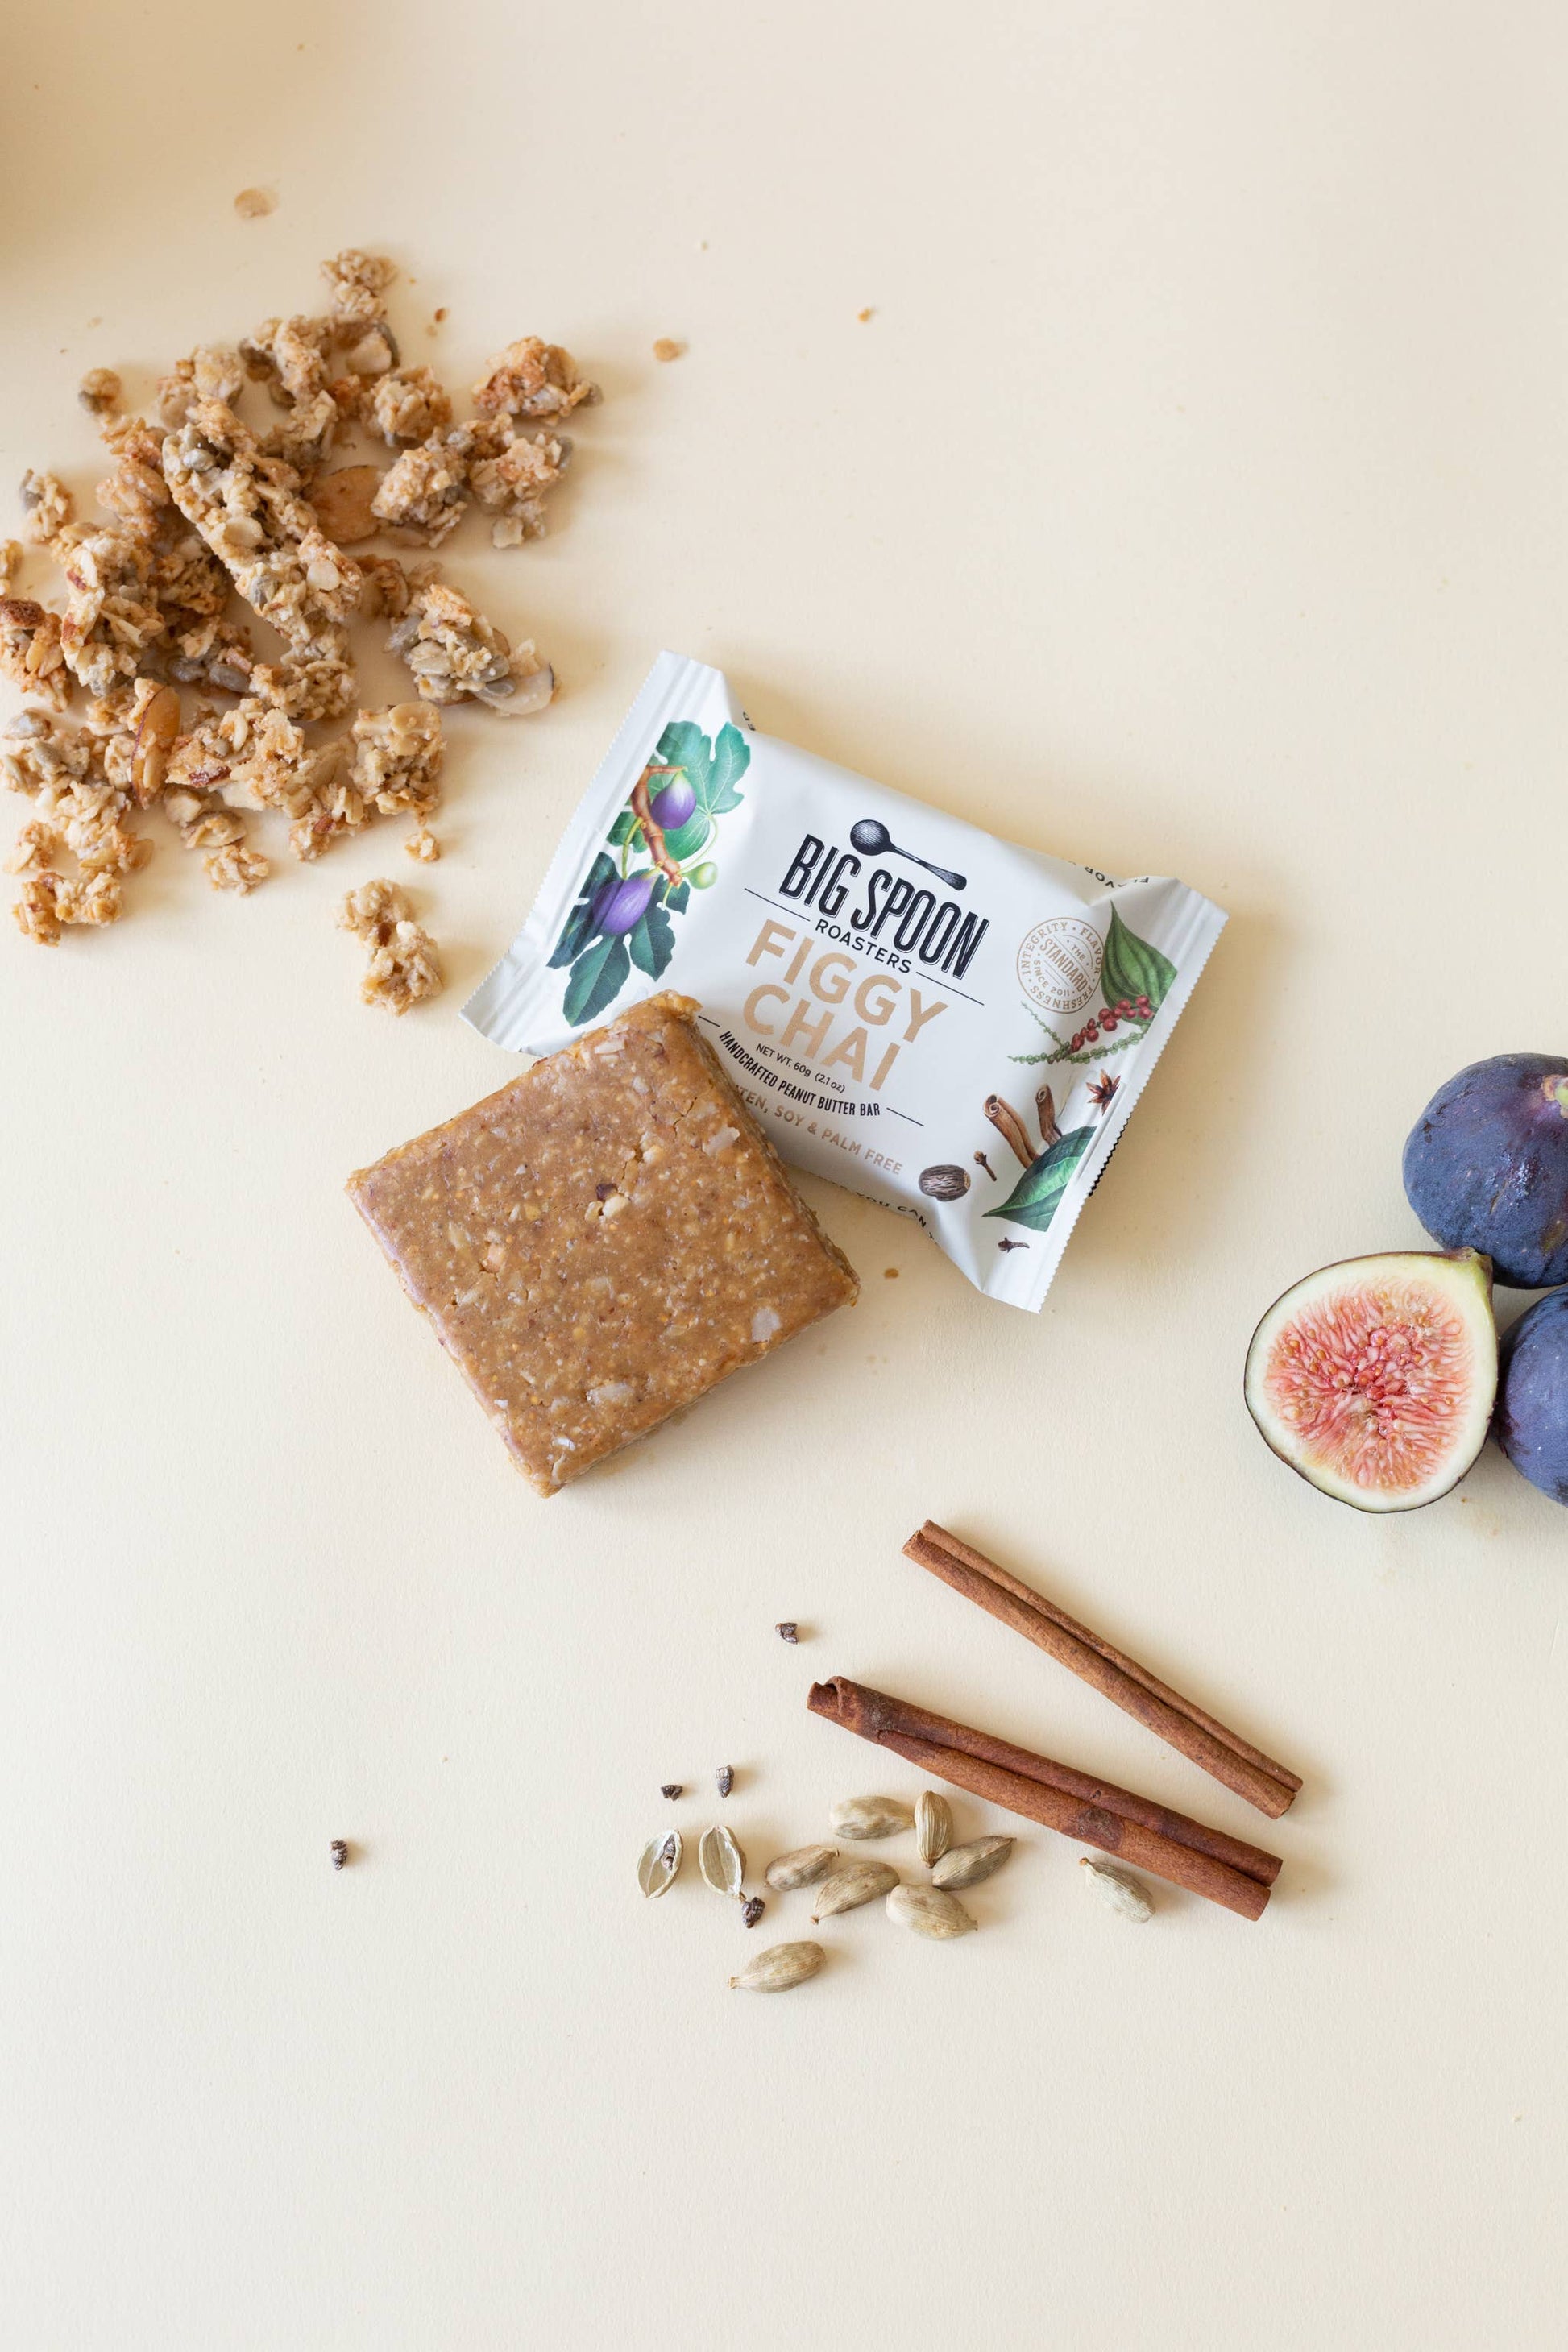 Big Spoon Figgy Chai Peanut Butter Bar  Big Spoon Roasters   -better made easy-eco-friendly-sustainable-gifting